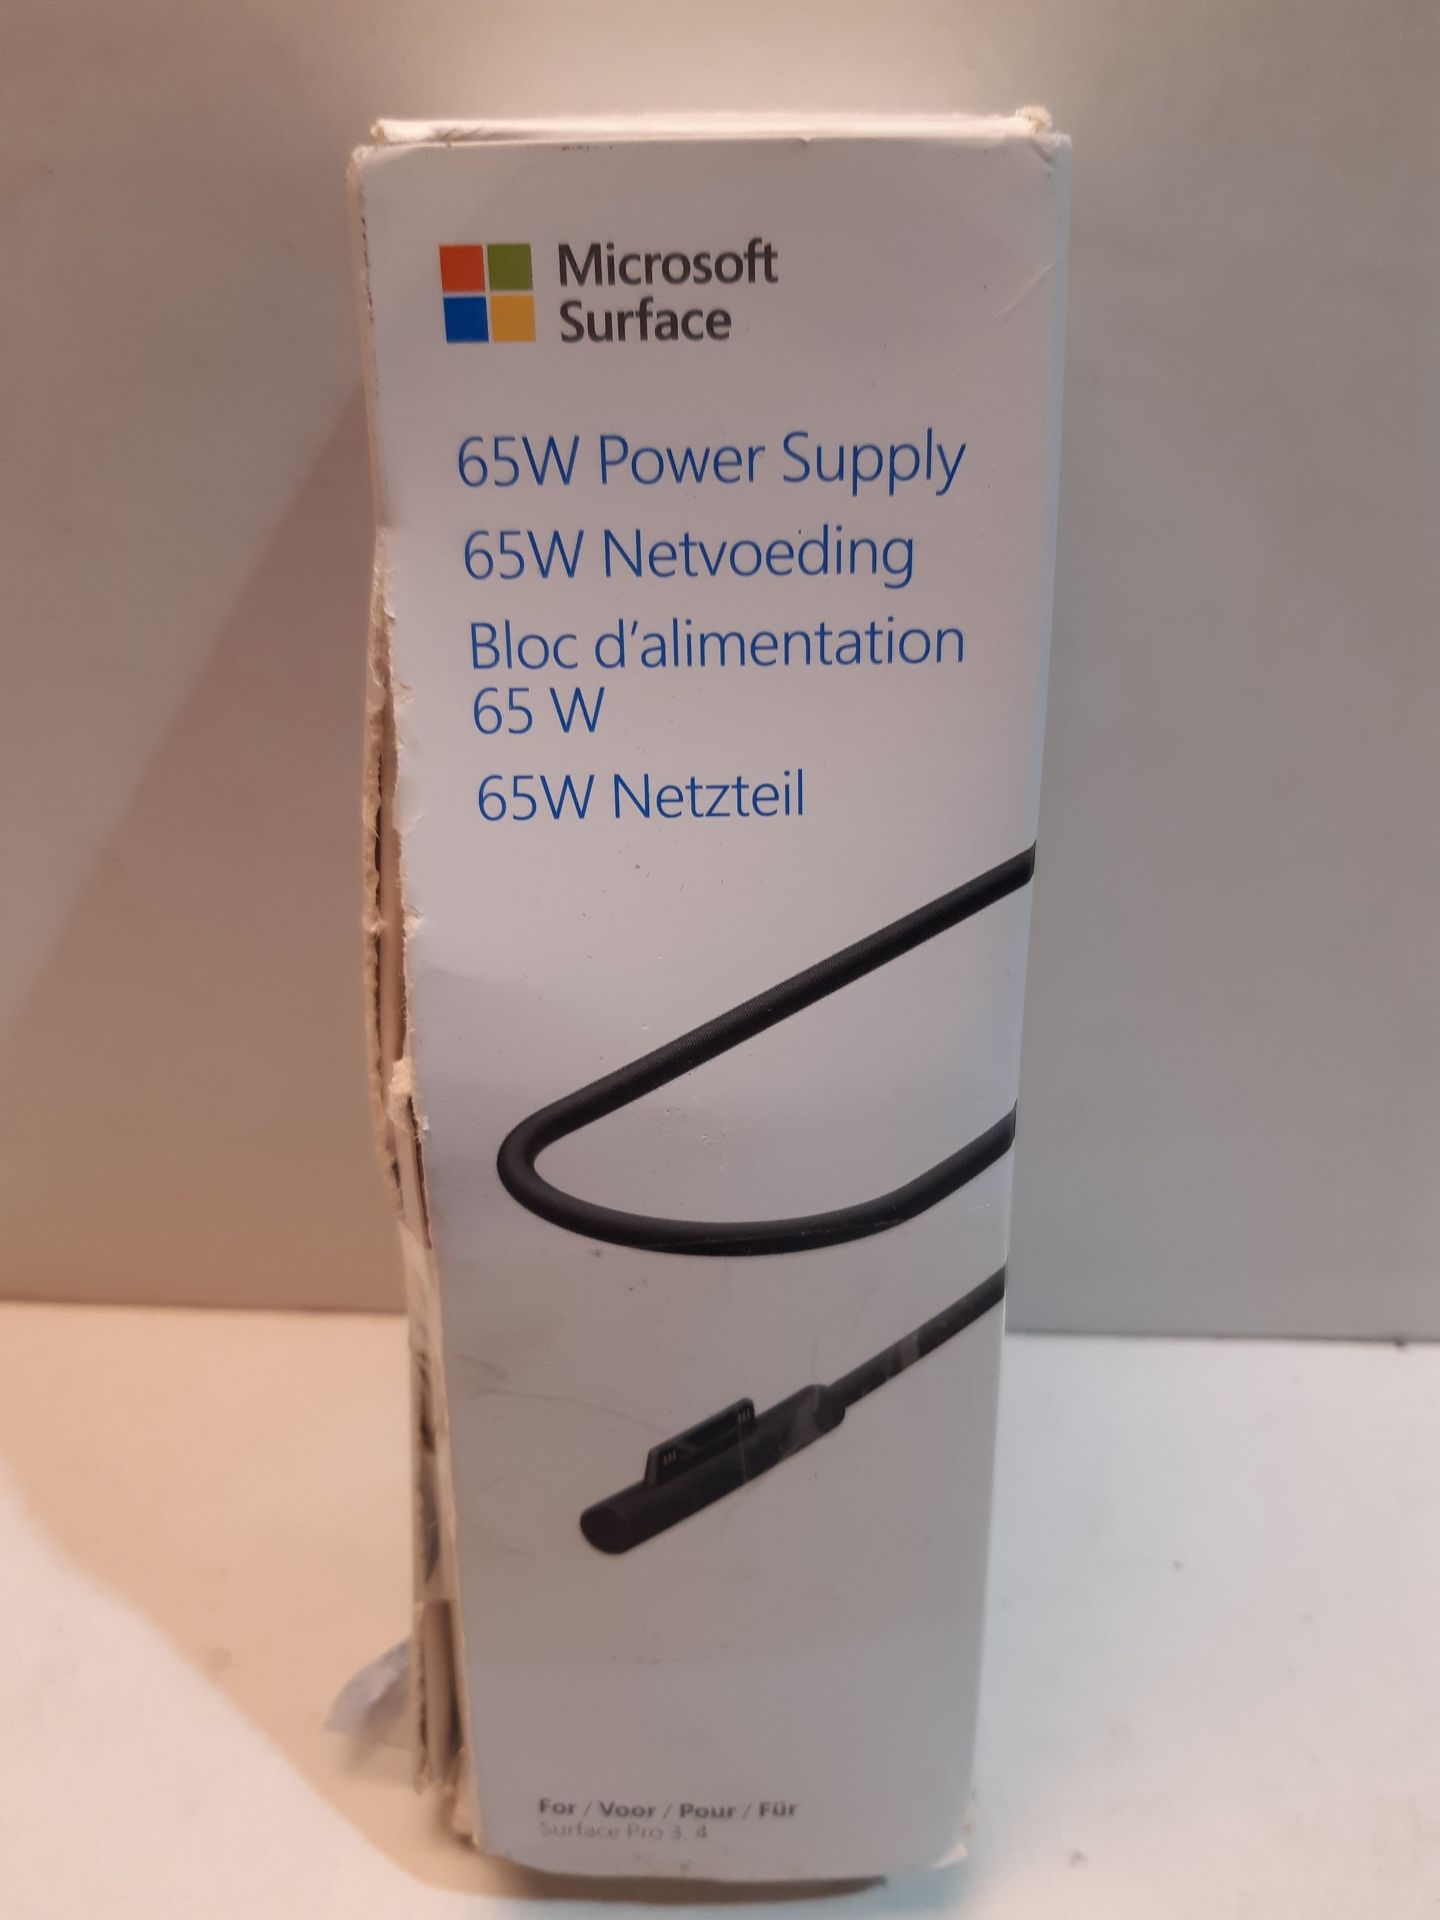 RRP £75.00 Microsoft Surface 65W Power Supply (UK) for Surface Pro 4 - Image 2 of 2